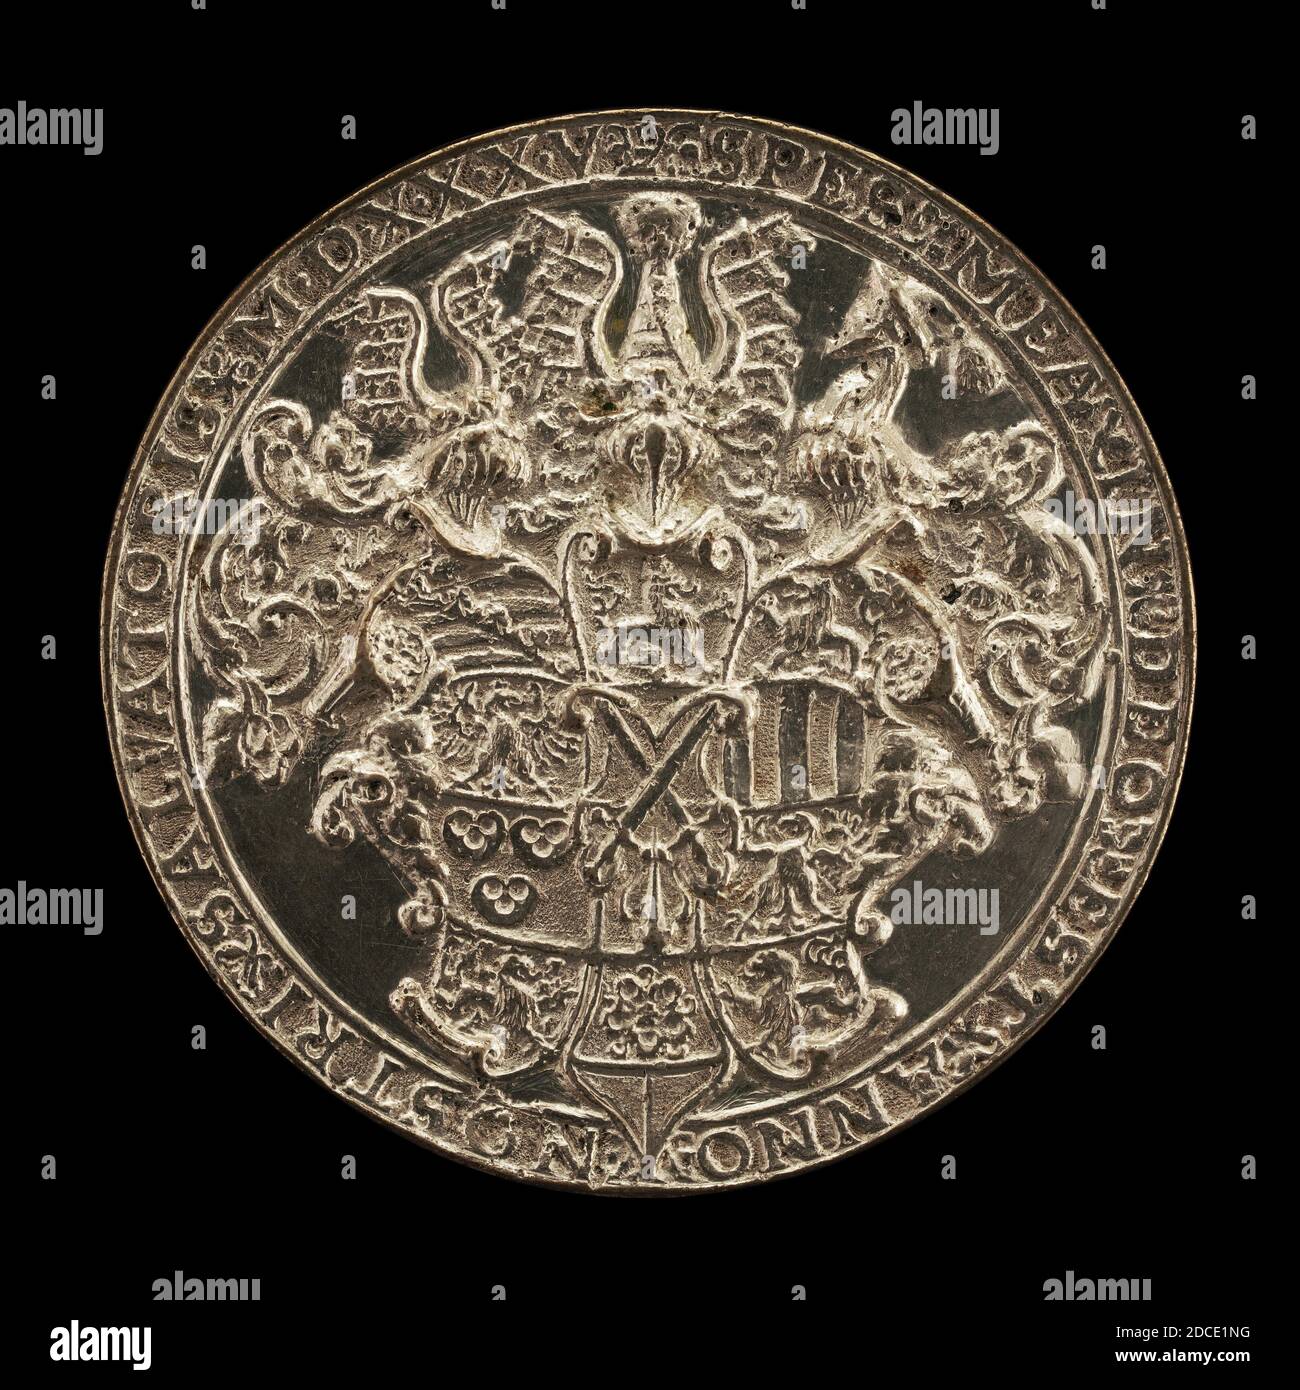 Hans Reinhart the Elder, (artist), German, c. 1510 - 1581, Shield with Helms and Crests, 1535, silver, overall (diameter): 6.51 cm (2 9/16 in.), gross weight: 66.65 gr (0.147 lb.), axis: 12:006.51 Stock Photo